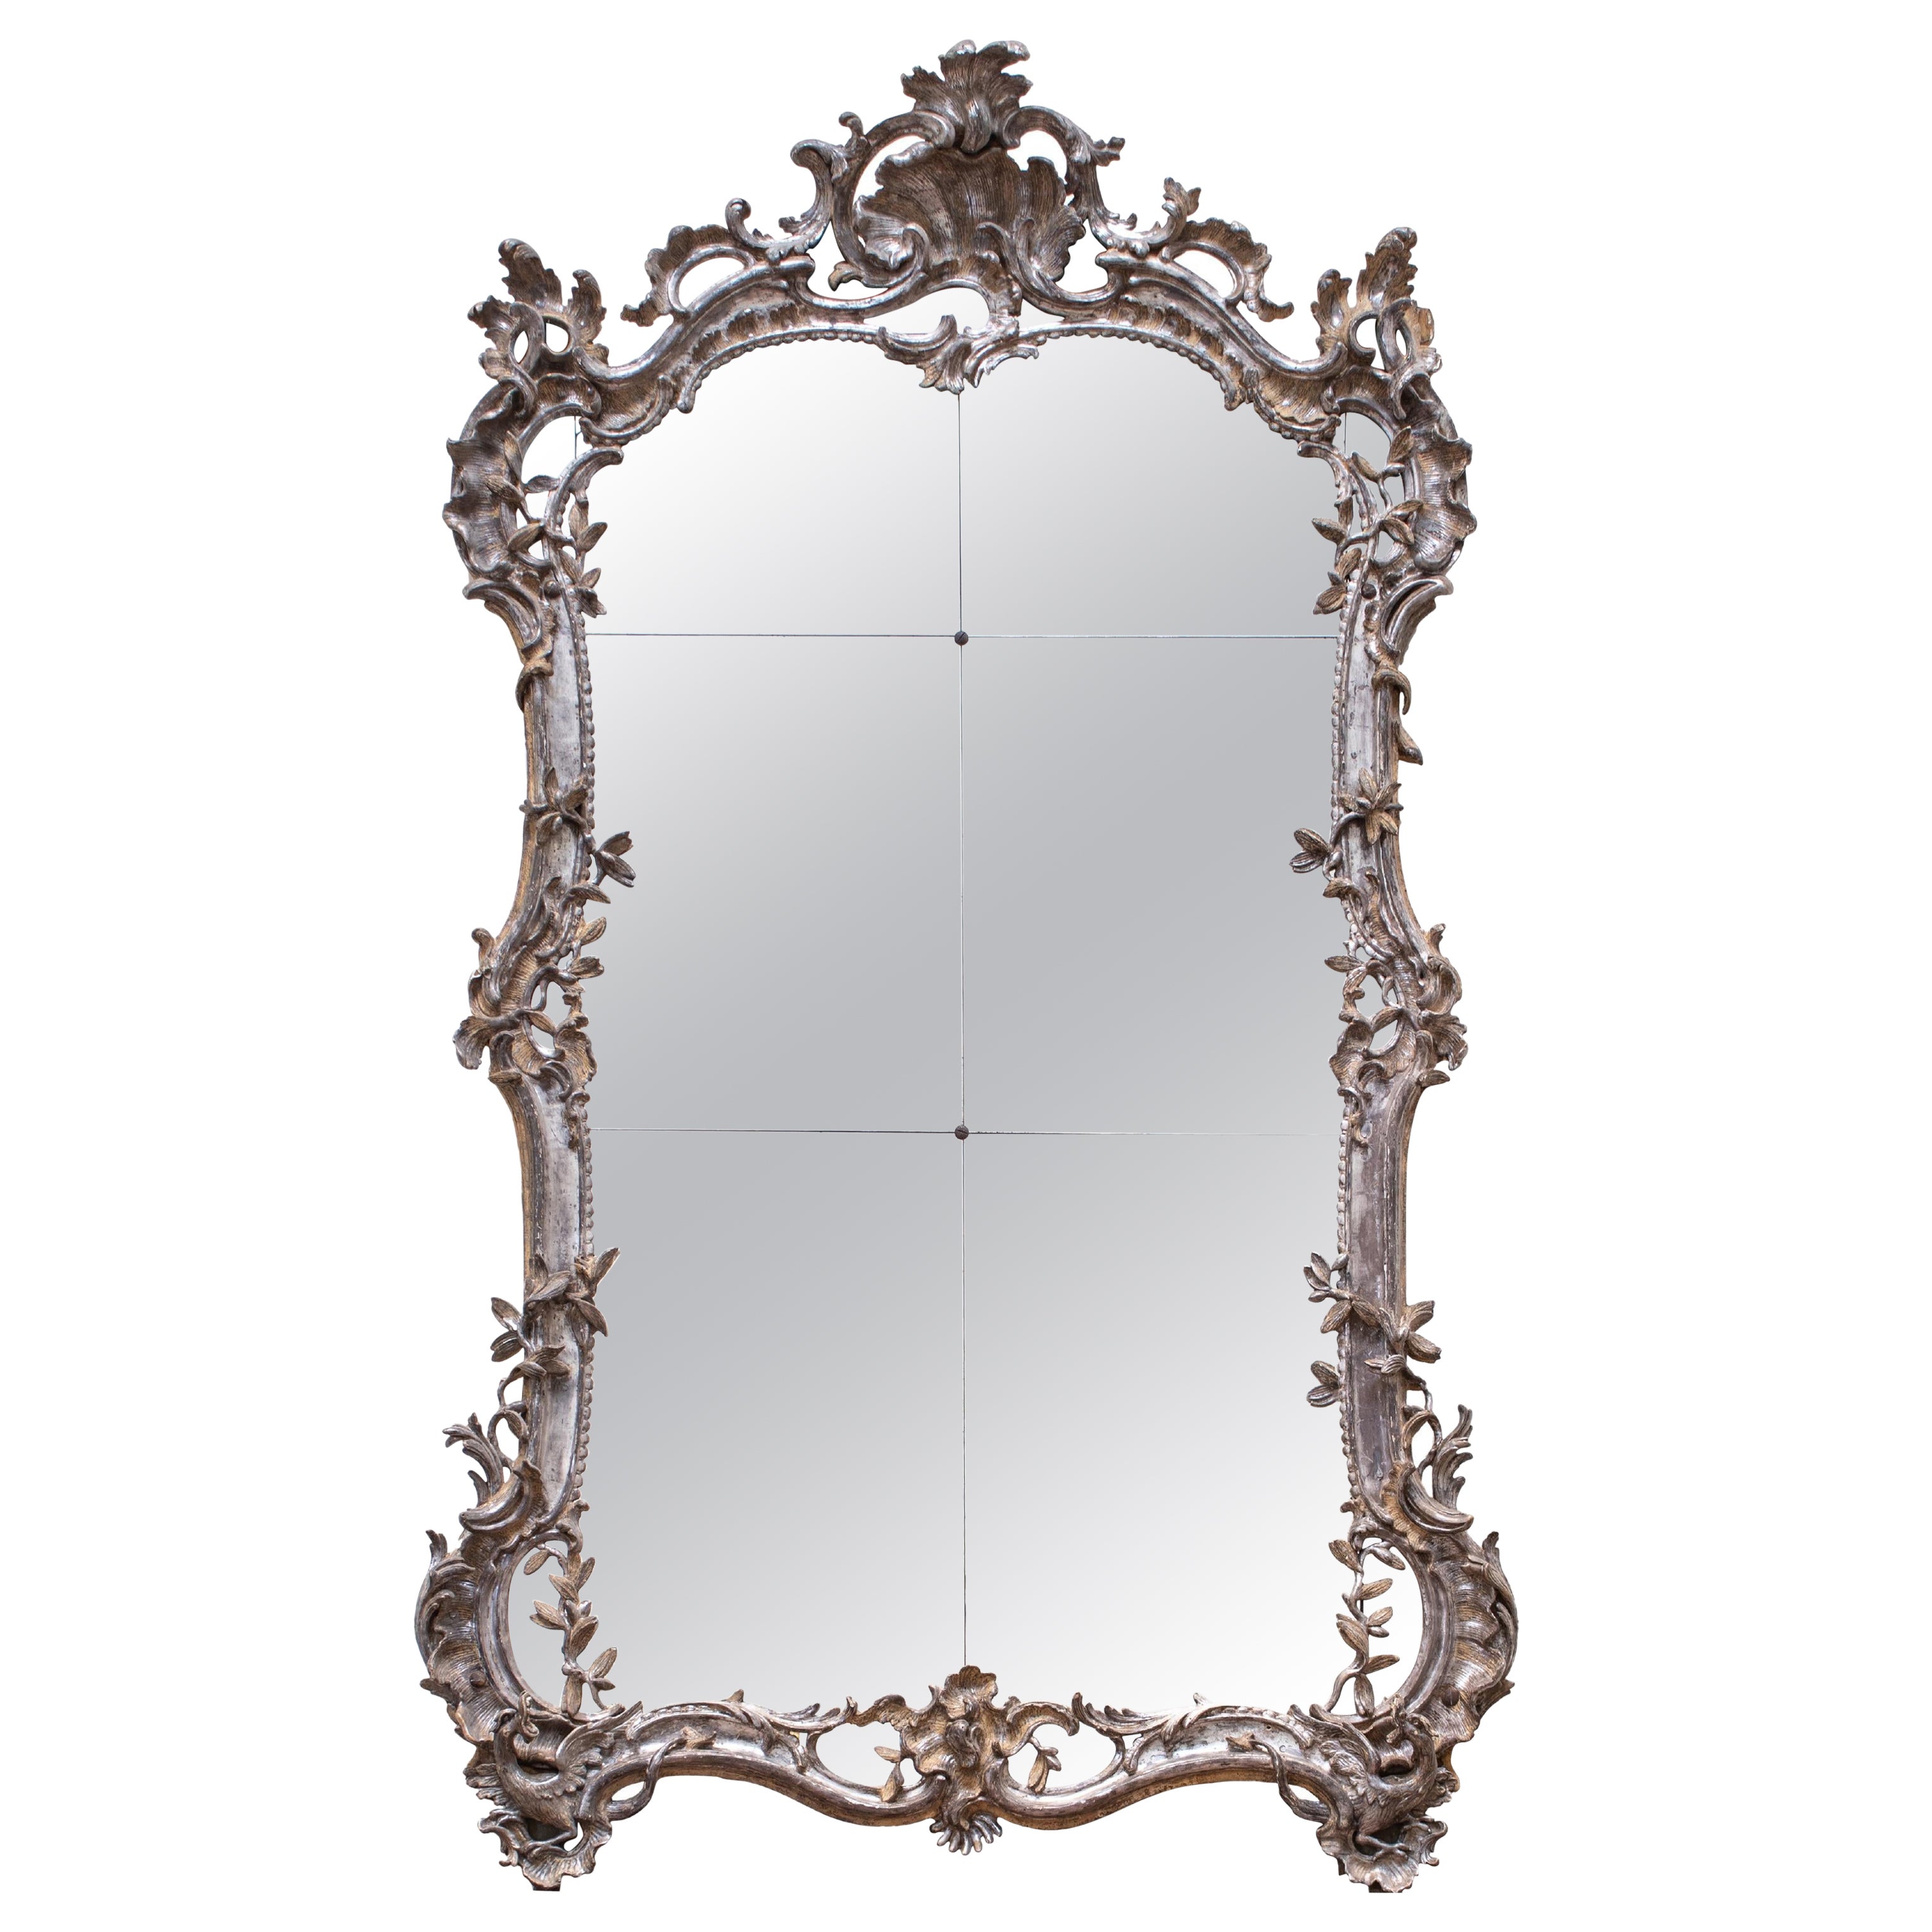 Mid-18th Century Silvered Wood Carved Mirror in Rococo Style For Sale